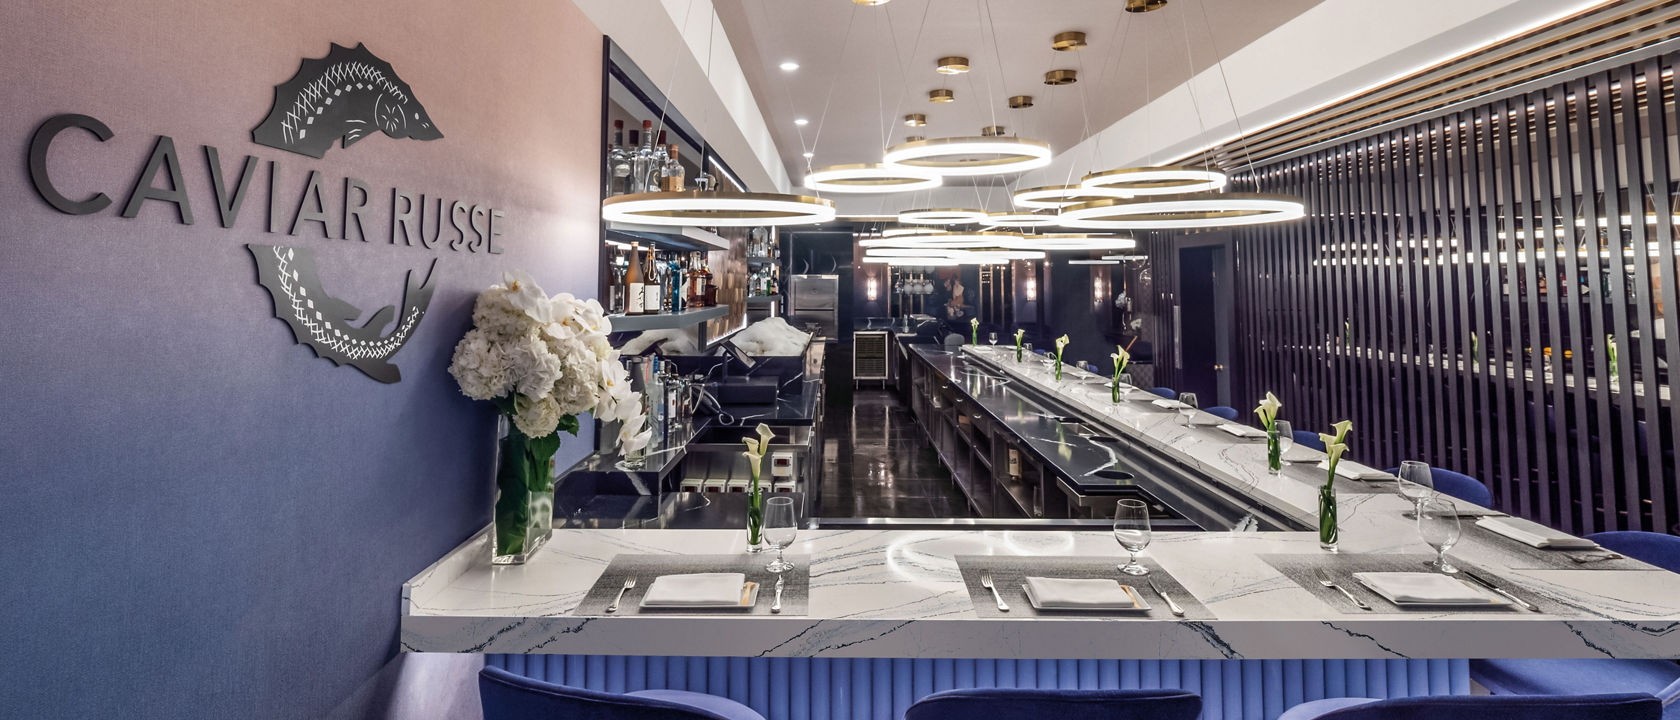 a bar at Caviar Russe topped with white quartz countertops.